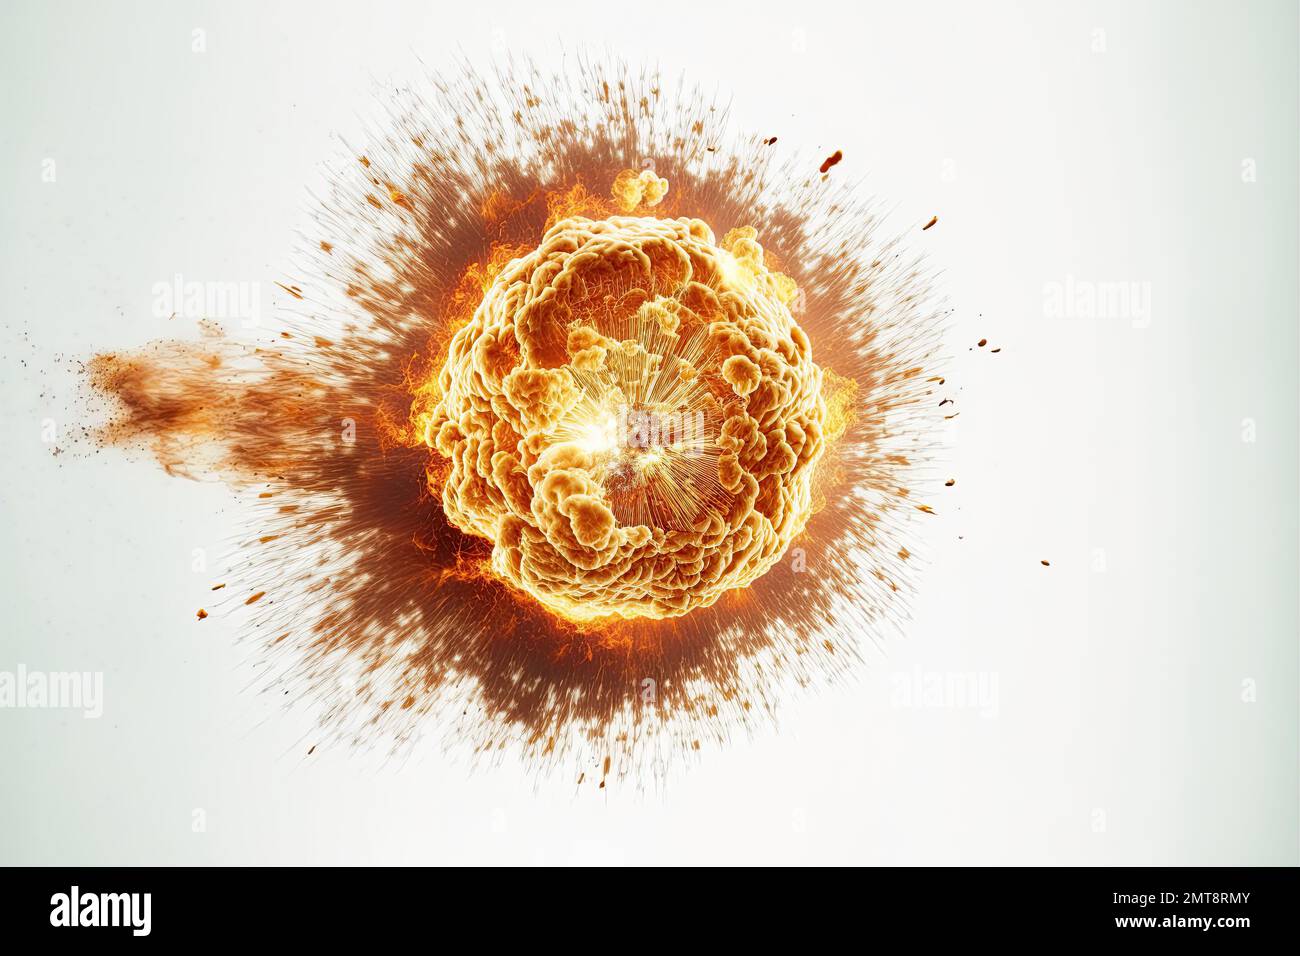 A blazing fireball caused by a nuclear detonation in a conflict-ridden area of space and world explosion on a pitch-white background. Nuclear blast in Stock Photo